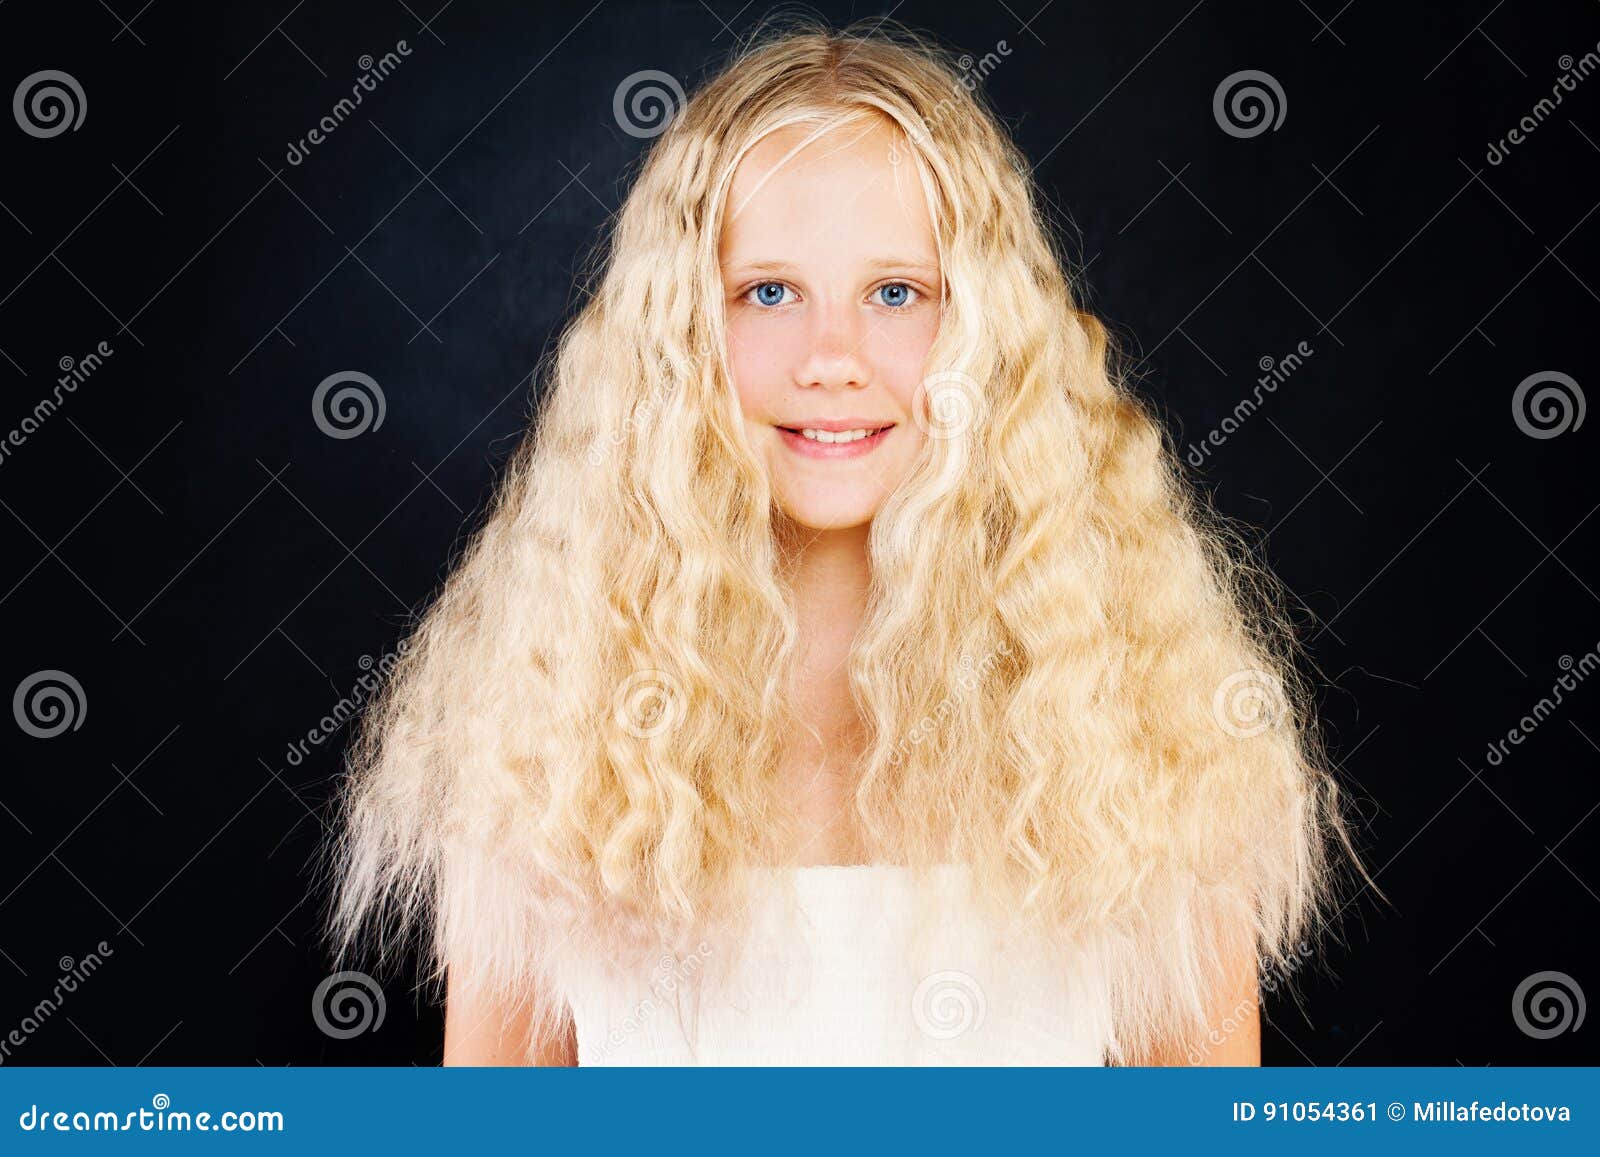 Young girl with blonde hair smiling - wide 5